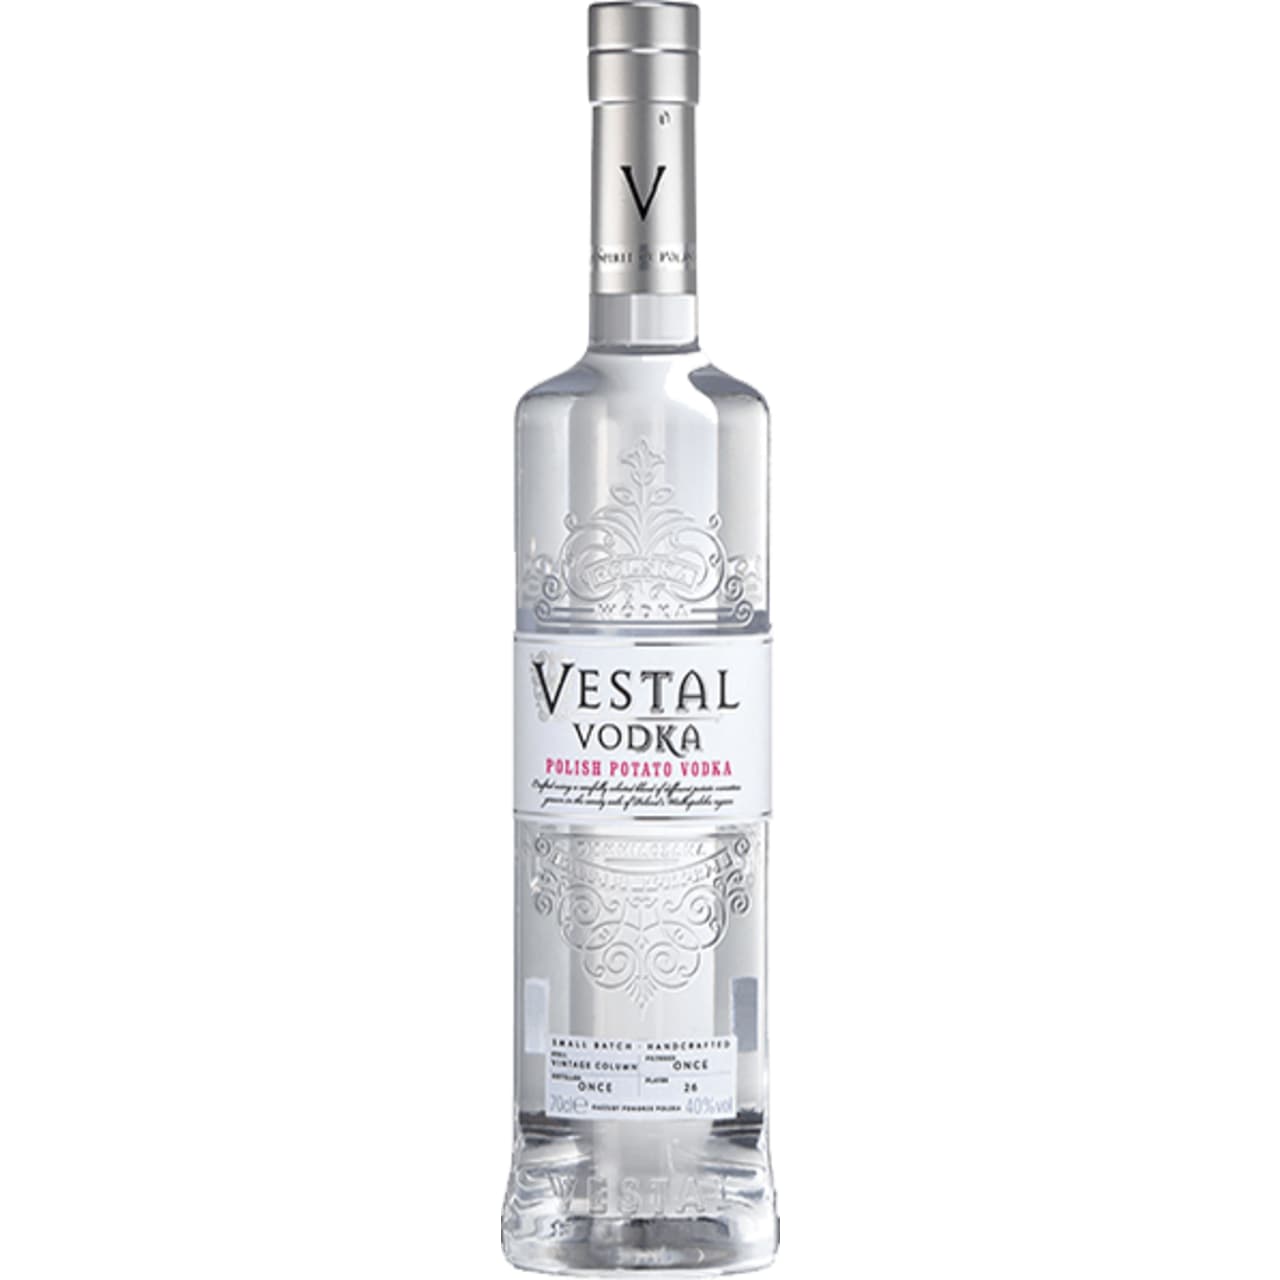 Made from a blend of premium polish potatoes for the ultimate vodka martini.